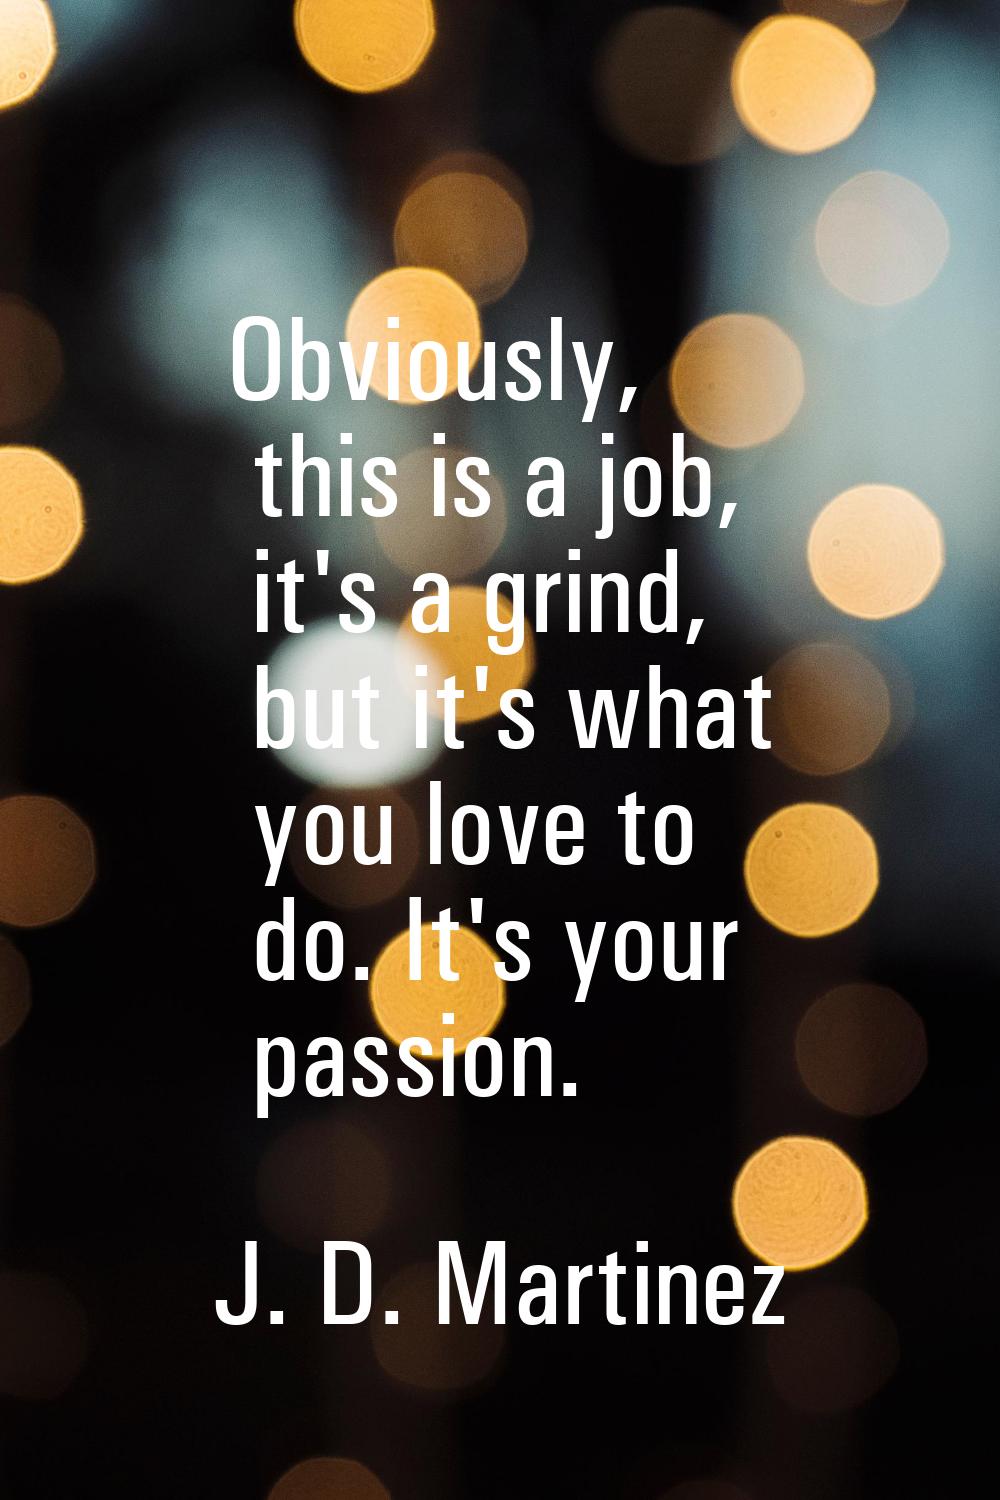 Obviously, this is a job, it's a grind, but it's what you love to do. It's your passion.